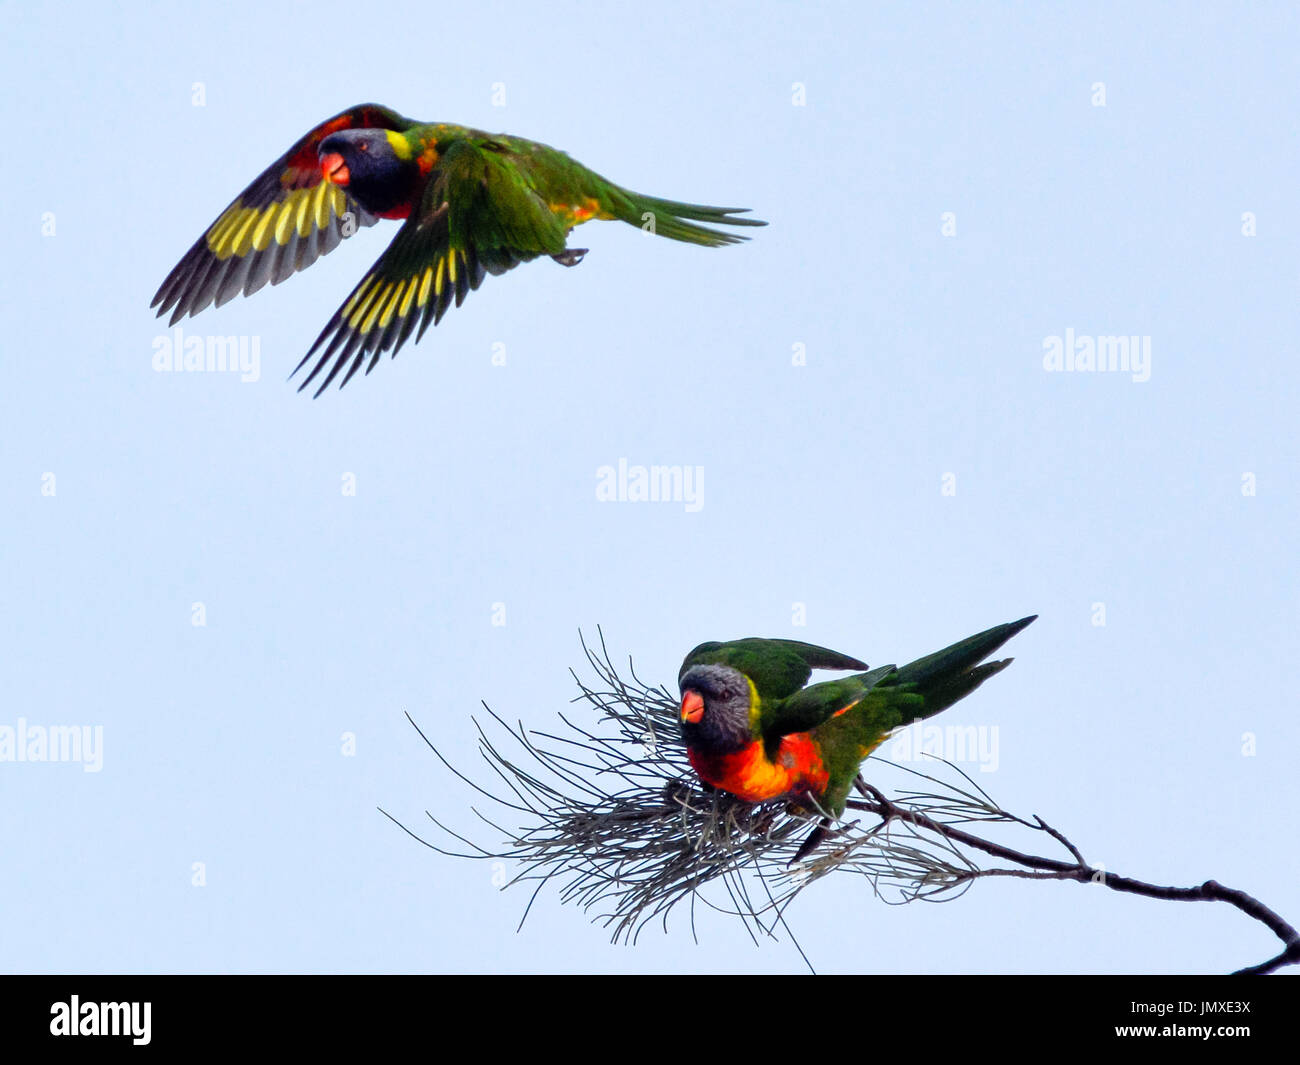 Rainbow Lorikeet flies above a second one at Cape Byron Bay, New South Wales, Australia. Stock Photo